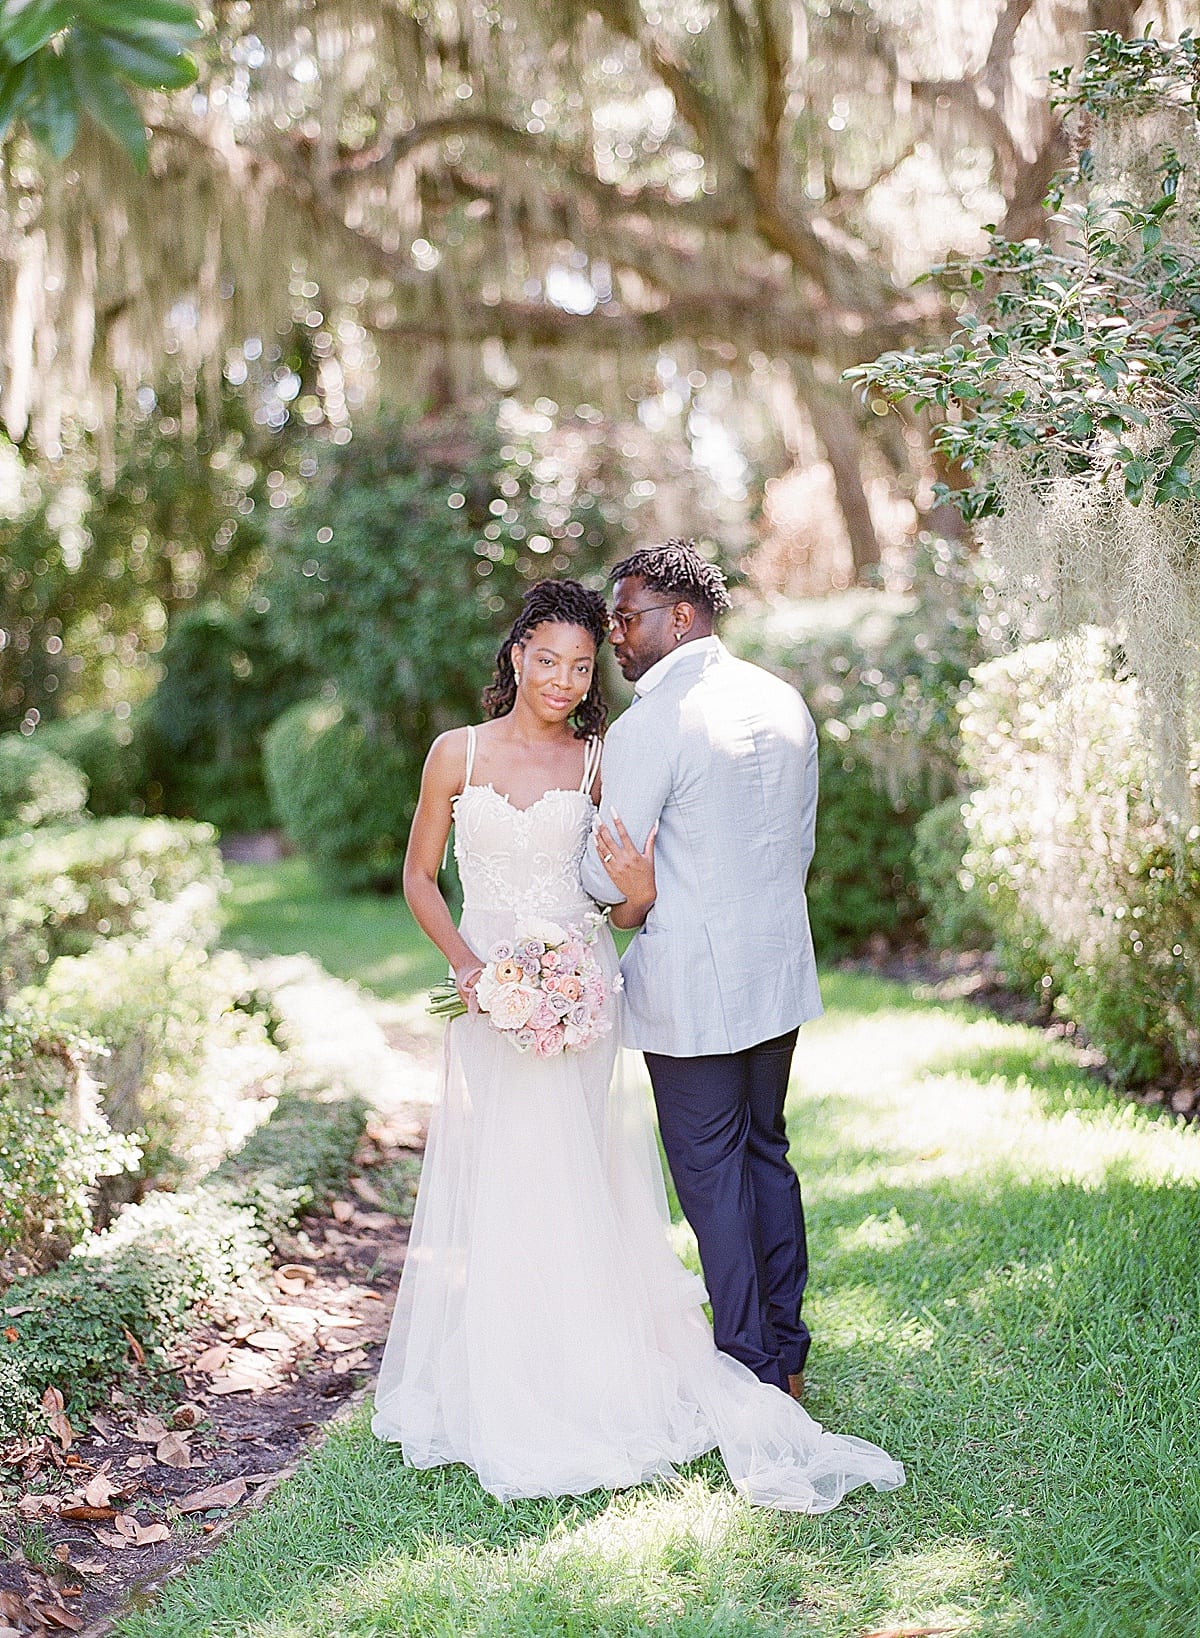 Sea Island Wedding at Musgrove Retreat Bride and Groom Under Spanish Moss Covered Trees Photo 